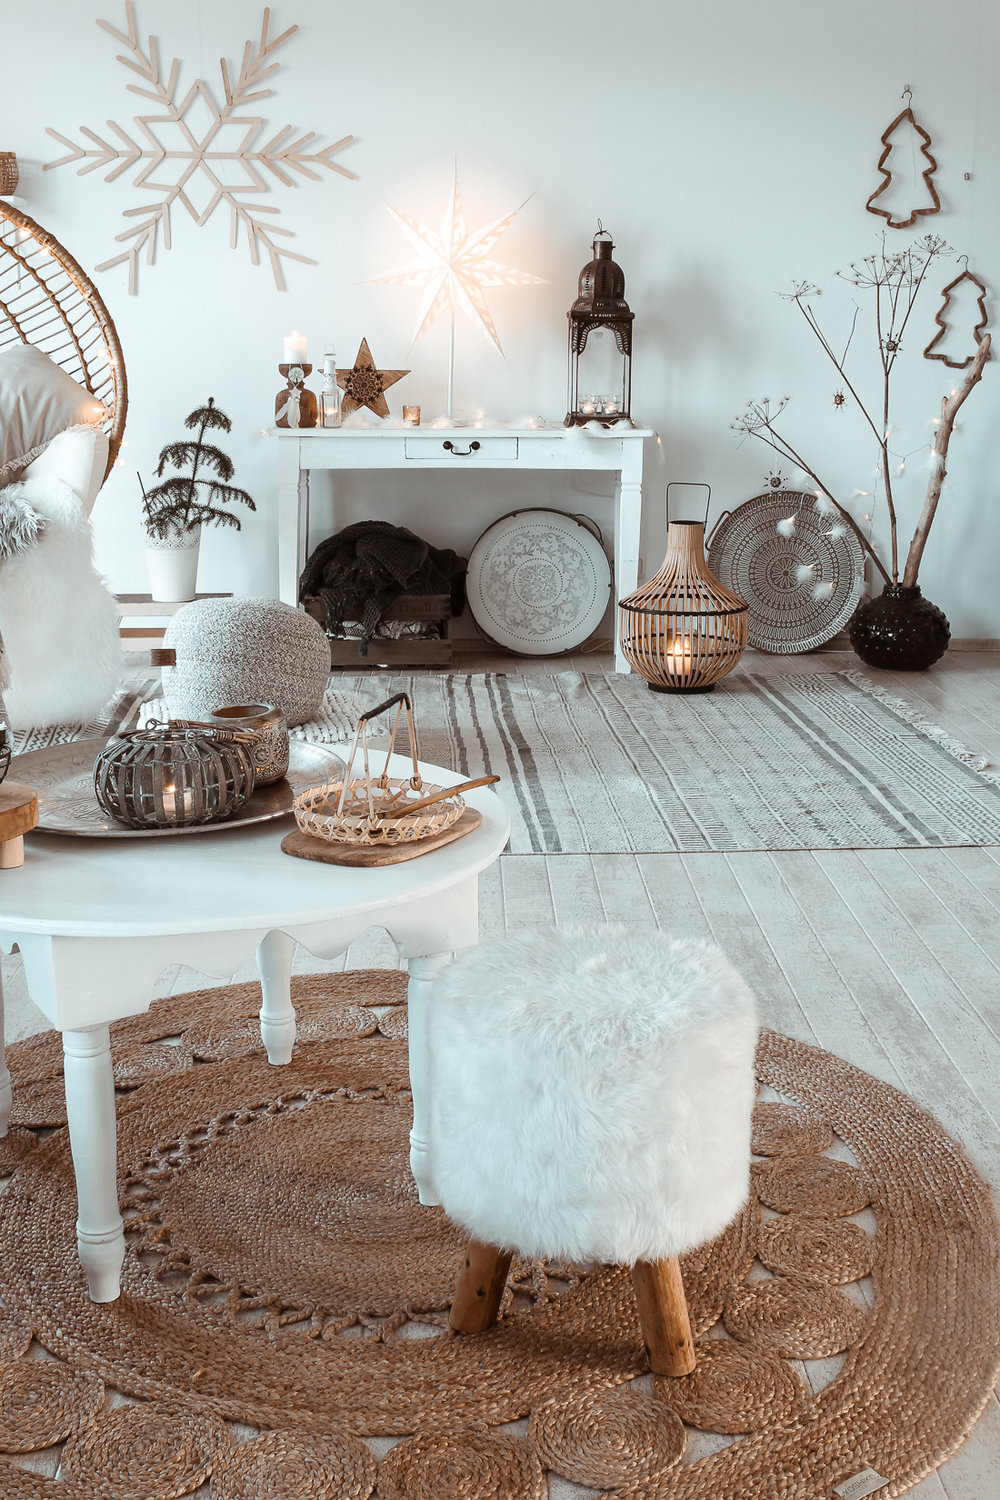 Visit This Warm, Natural Boho German Home For The Holidays